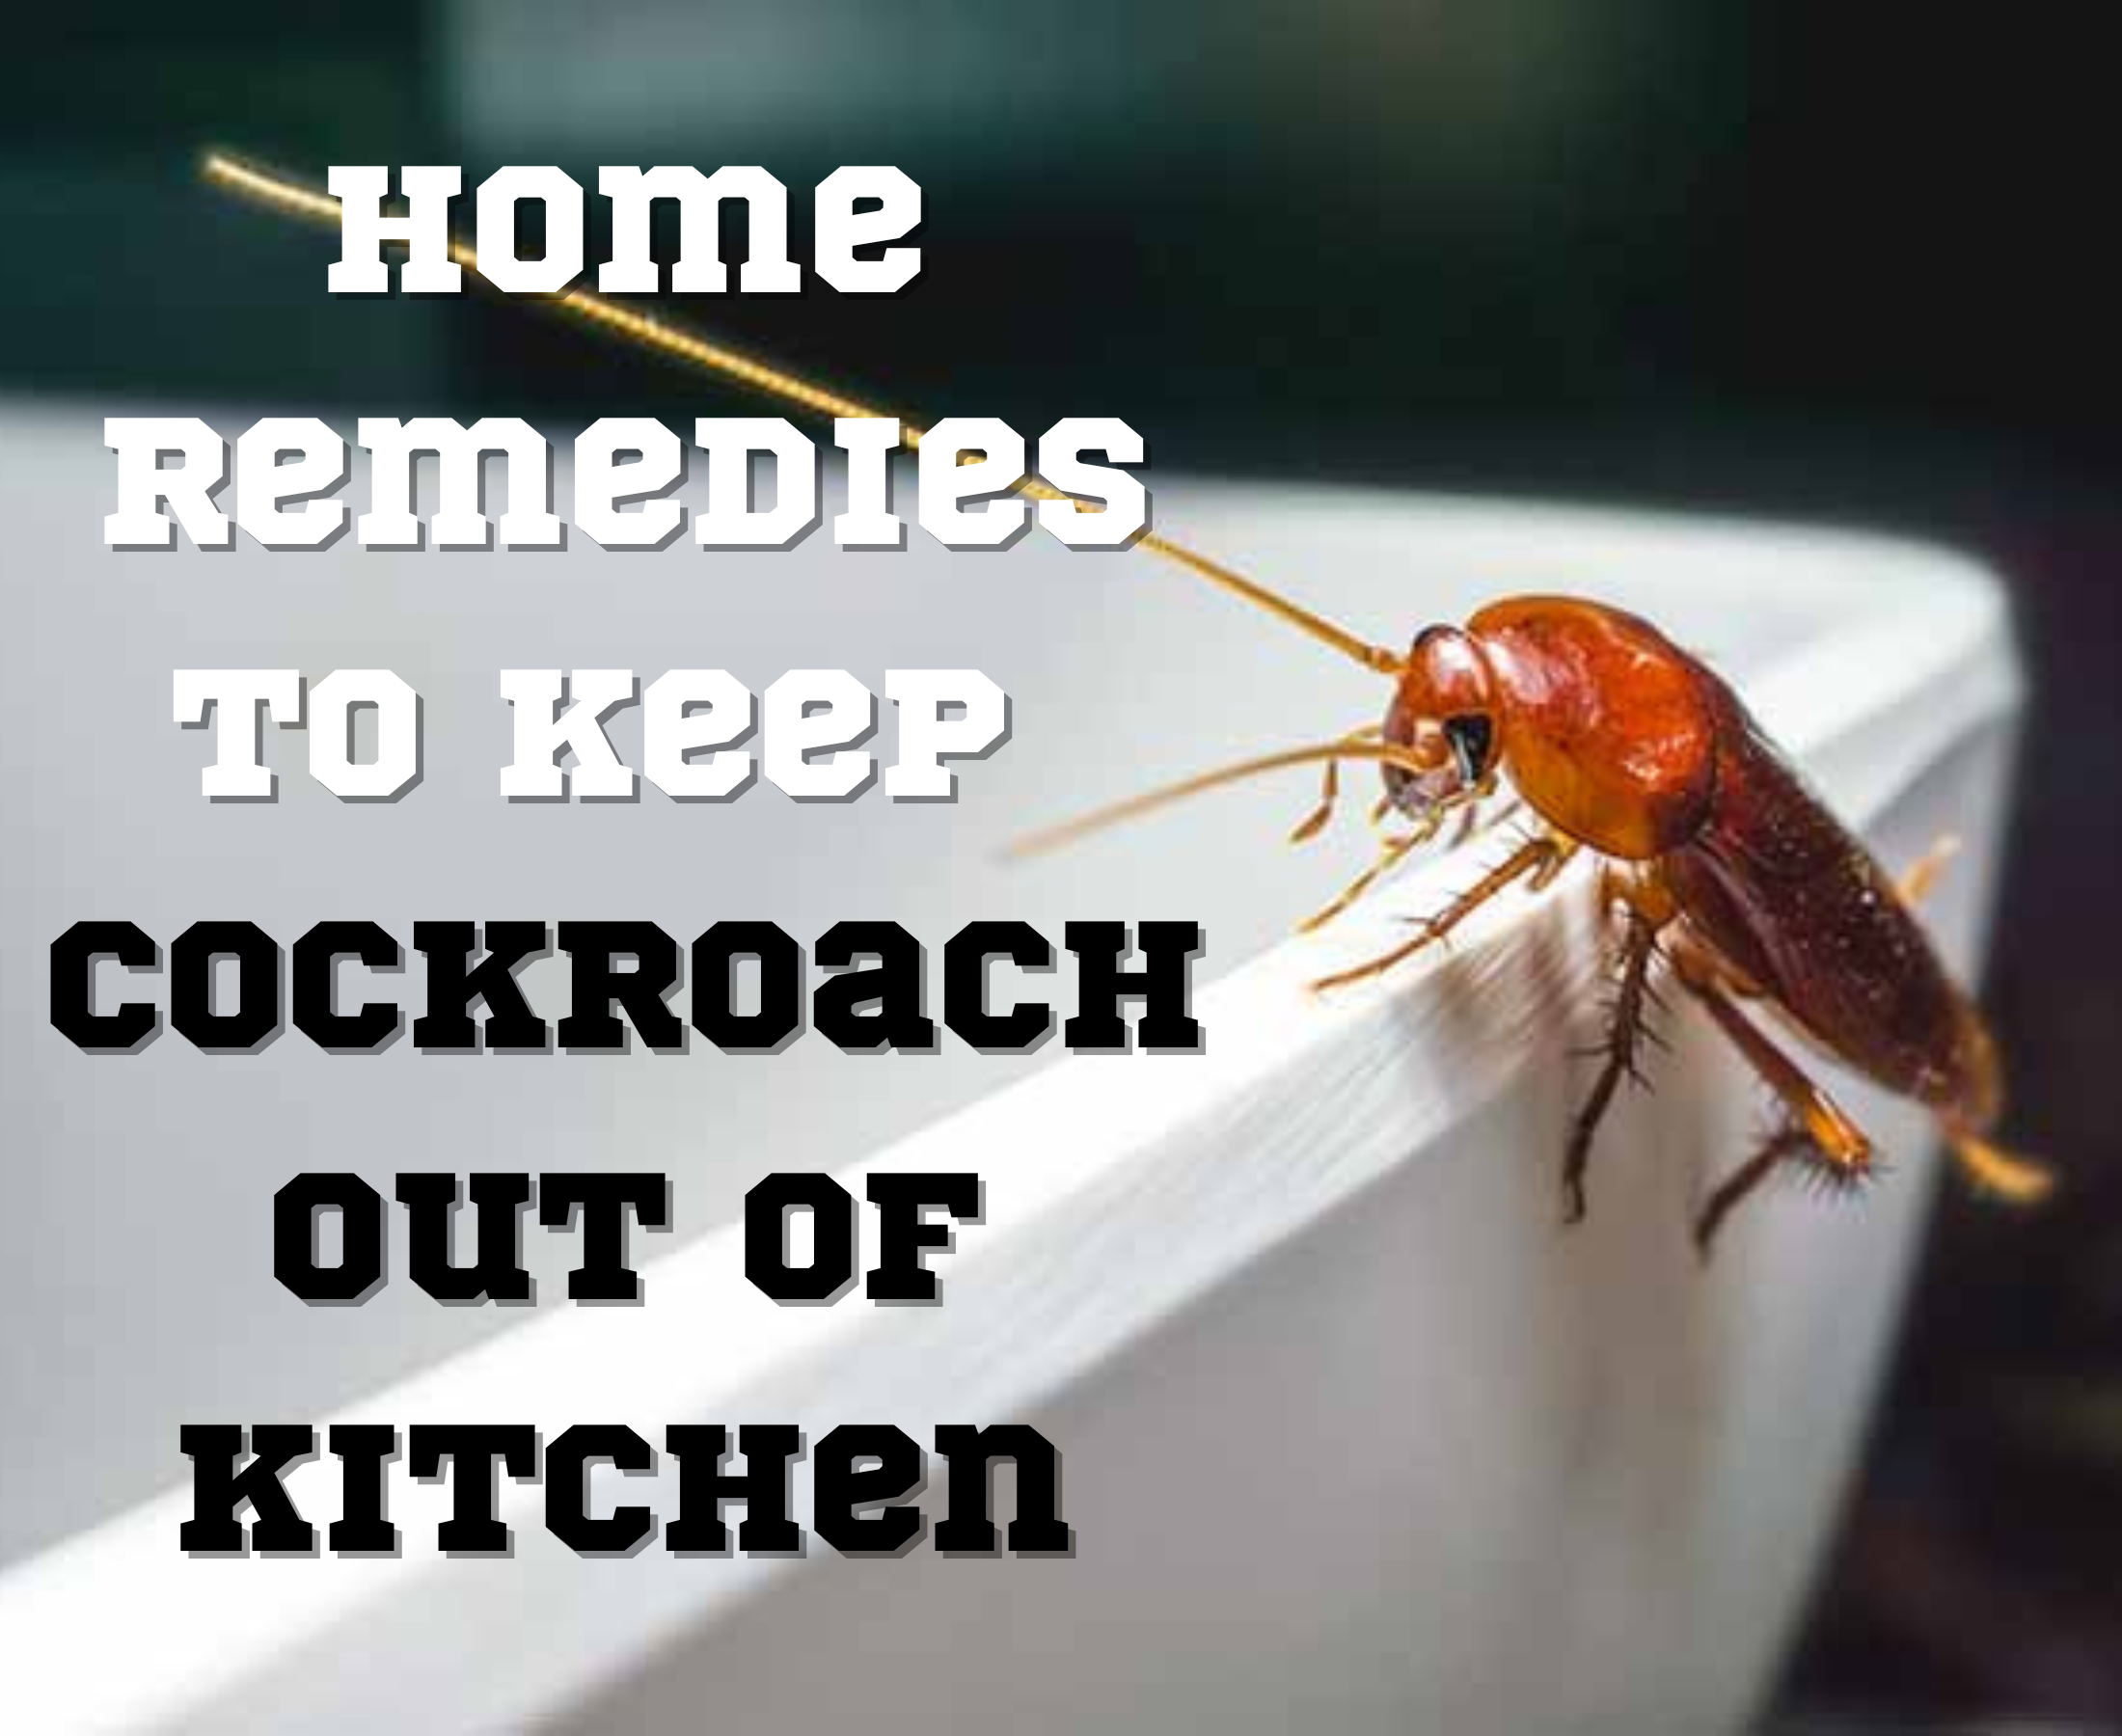 How to keep cockroaches out of the kitchen?